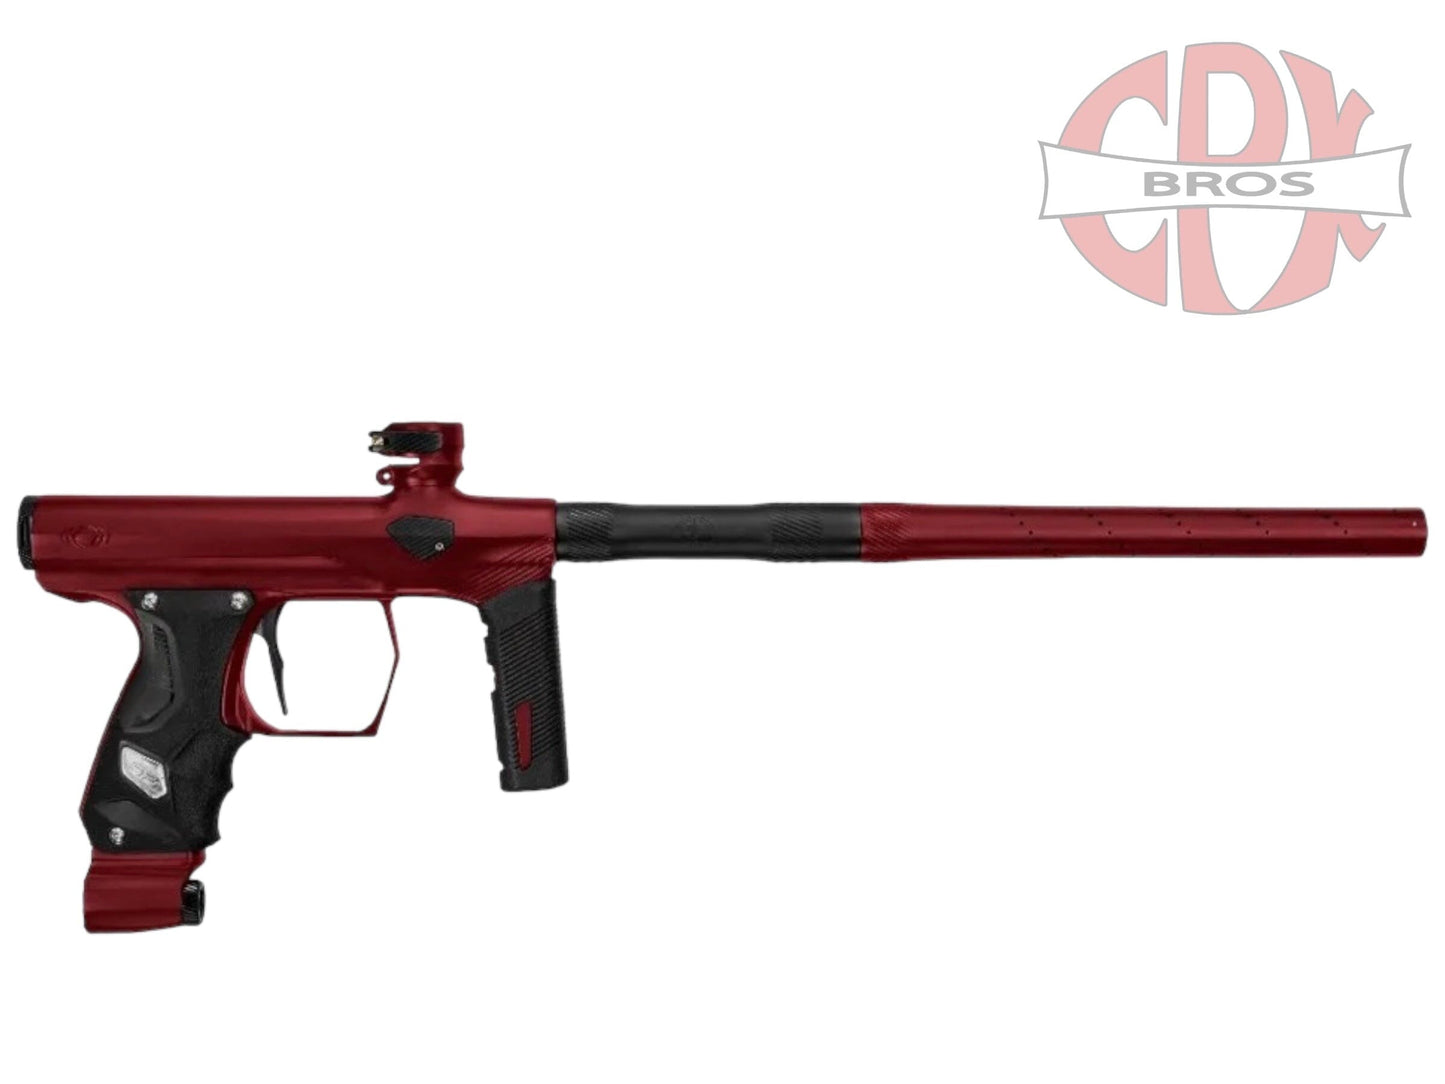 Used PRE-ORDER OF $994.95 SP Shocker ERA Paintball Gun - Matte Red Paintball Gun from CPXBrosPaintball Buy/Sell/Trade Paintball Markers, Paintball Hoppers, Paintball Masks, and Hormesis Headbands